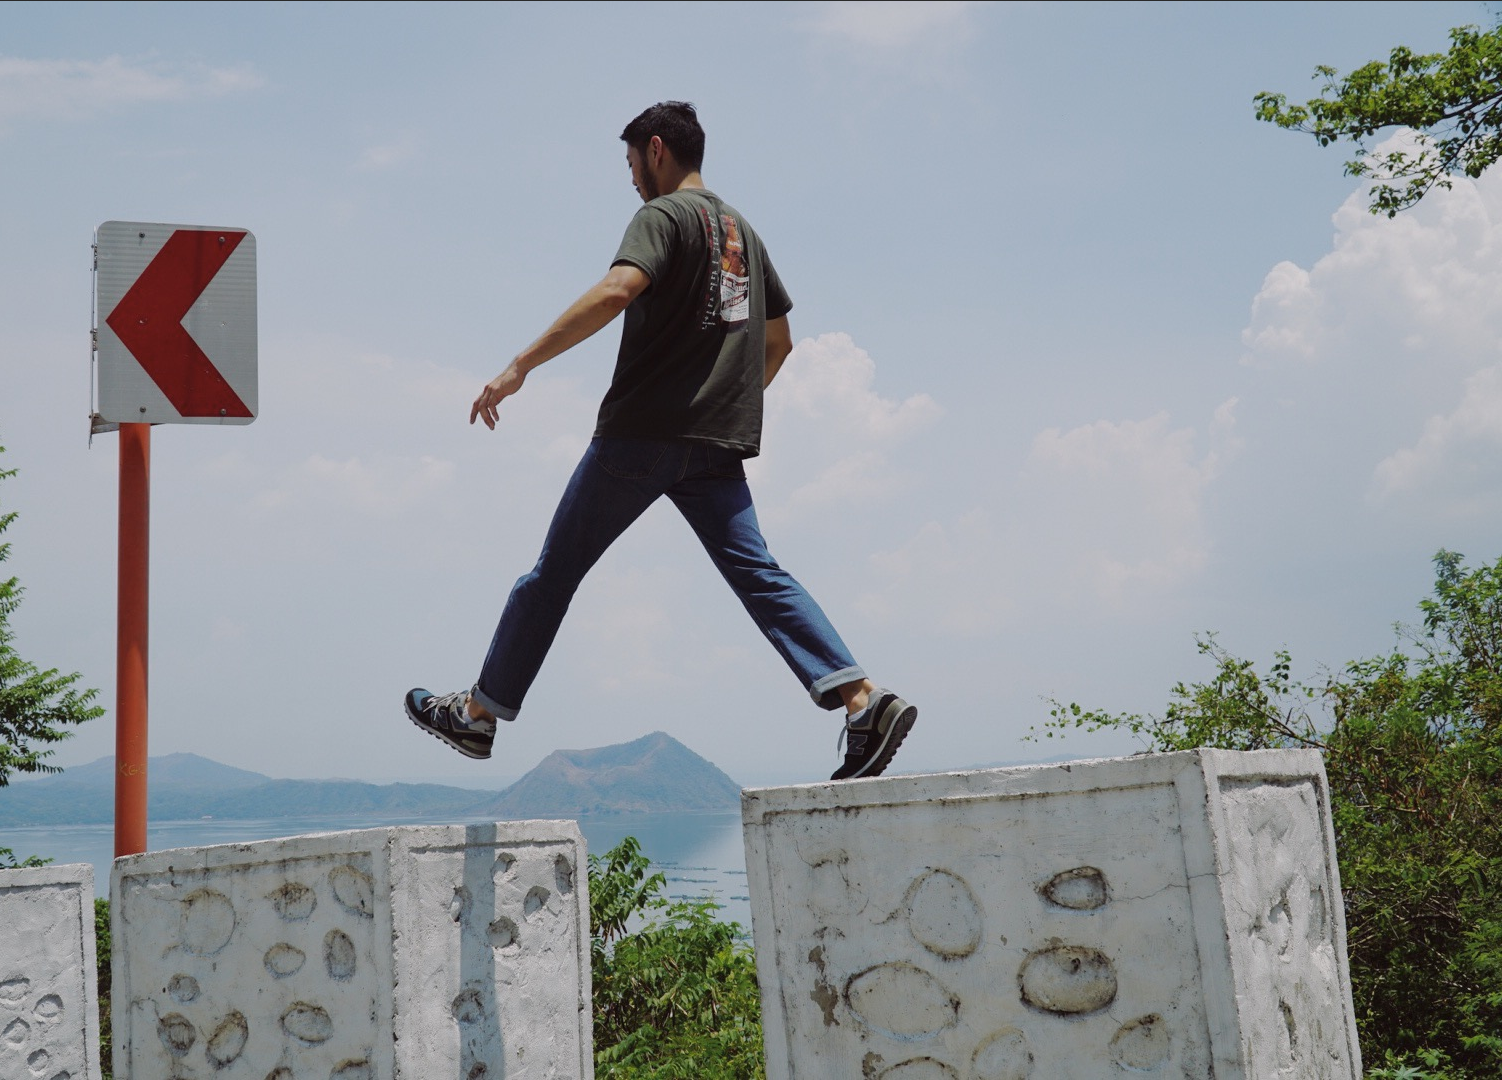 Image of paulo in mid-step as he appears to hop across concrete barriers. In the background, Taal Volcano can be seen in the distance across a body of water, under a clear blue sky scattered with clouds.